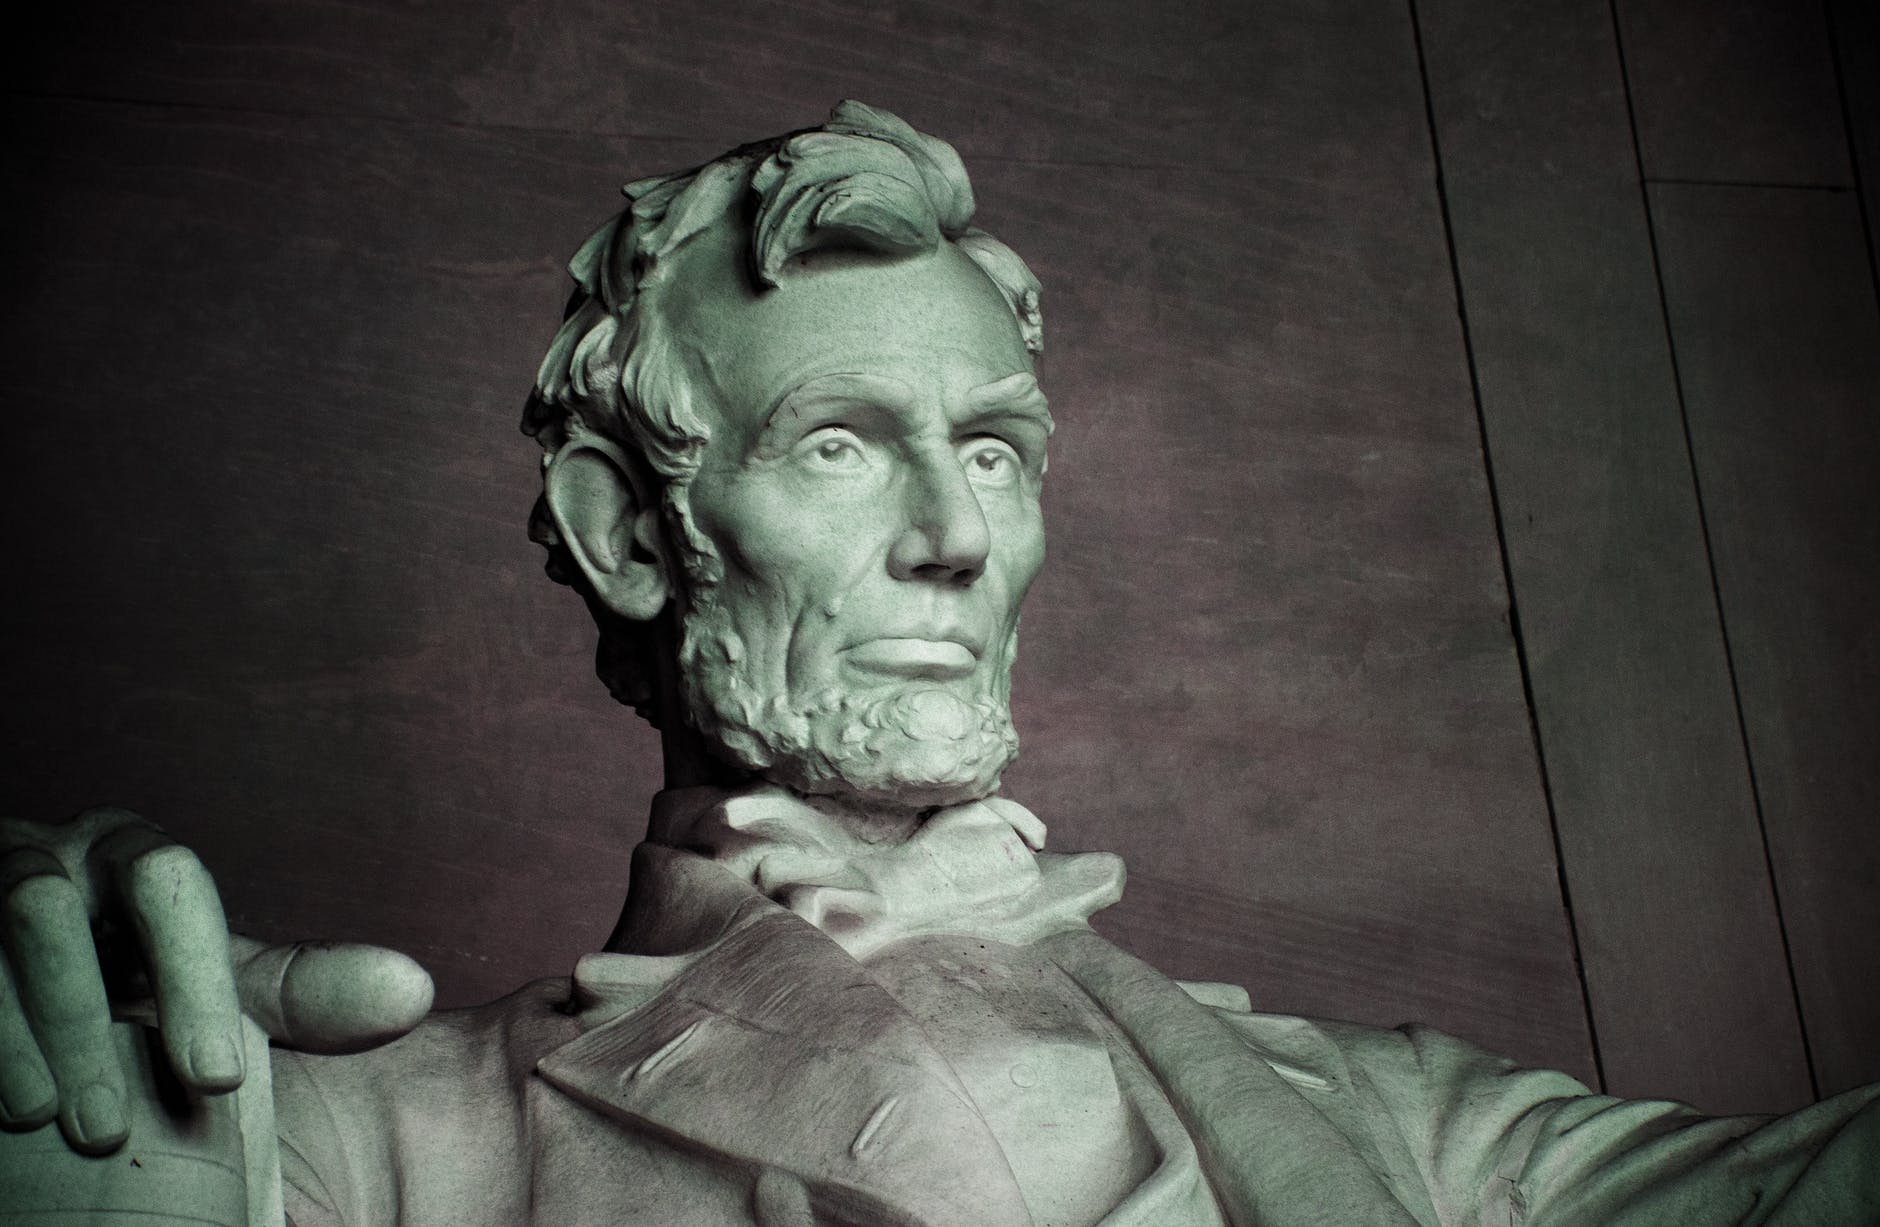 The camp had an Abraham Lincoln memorial replica. | Source: Pexels